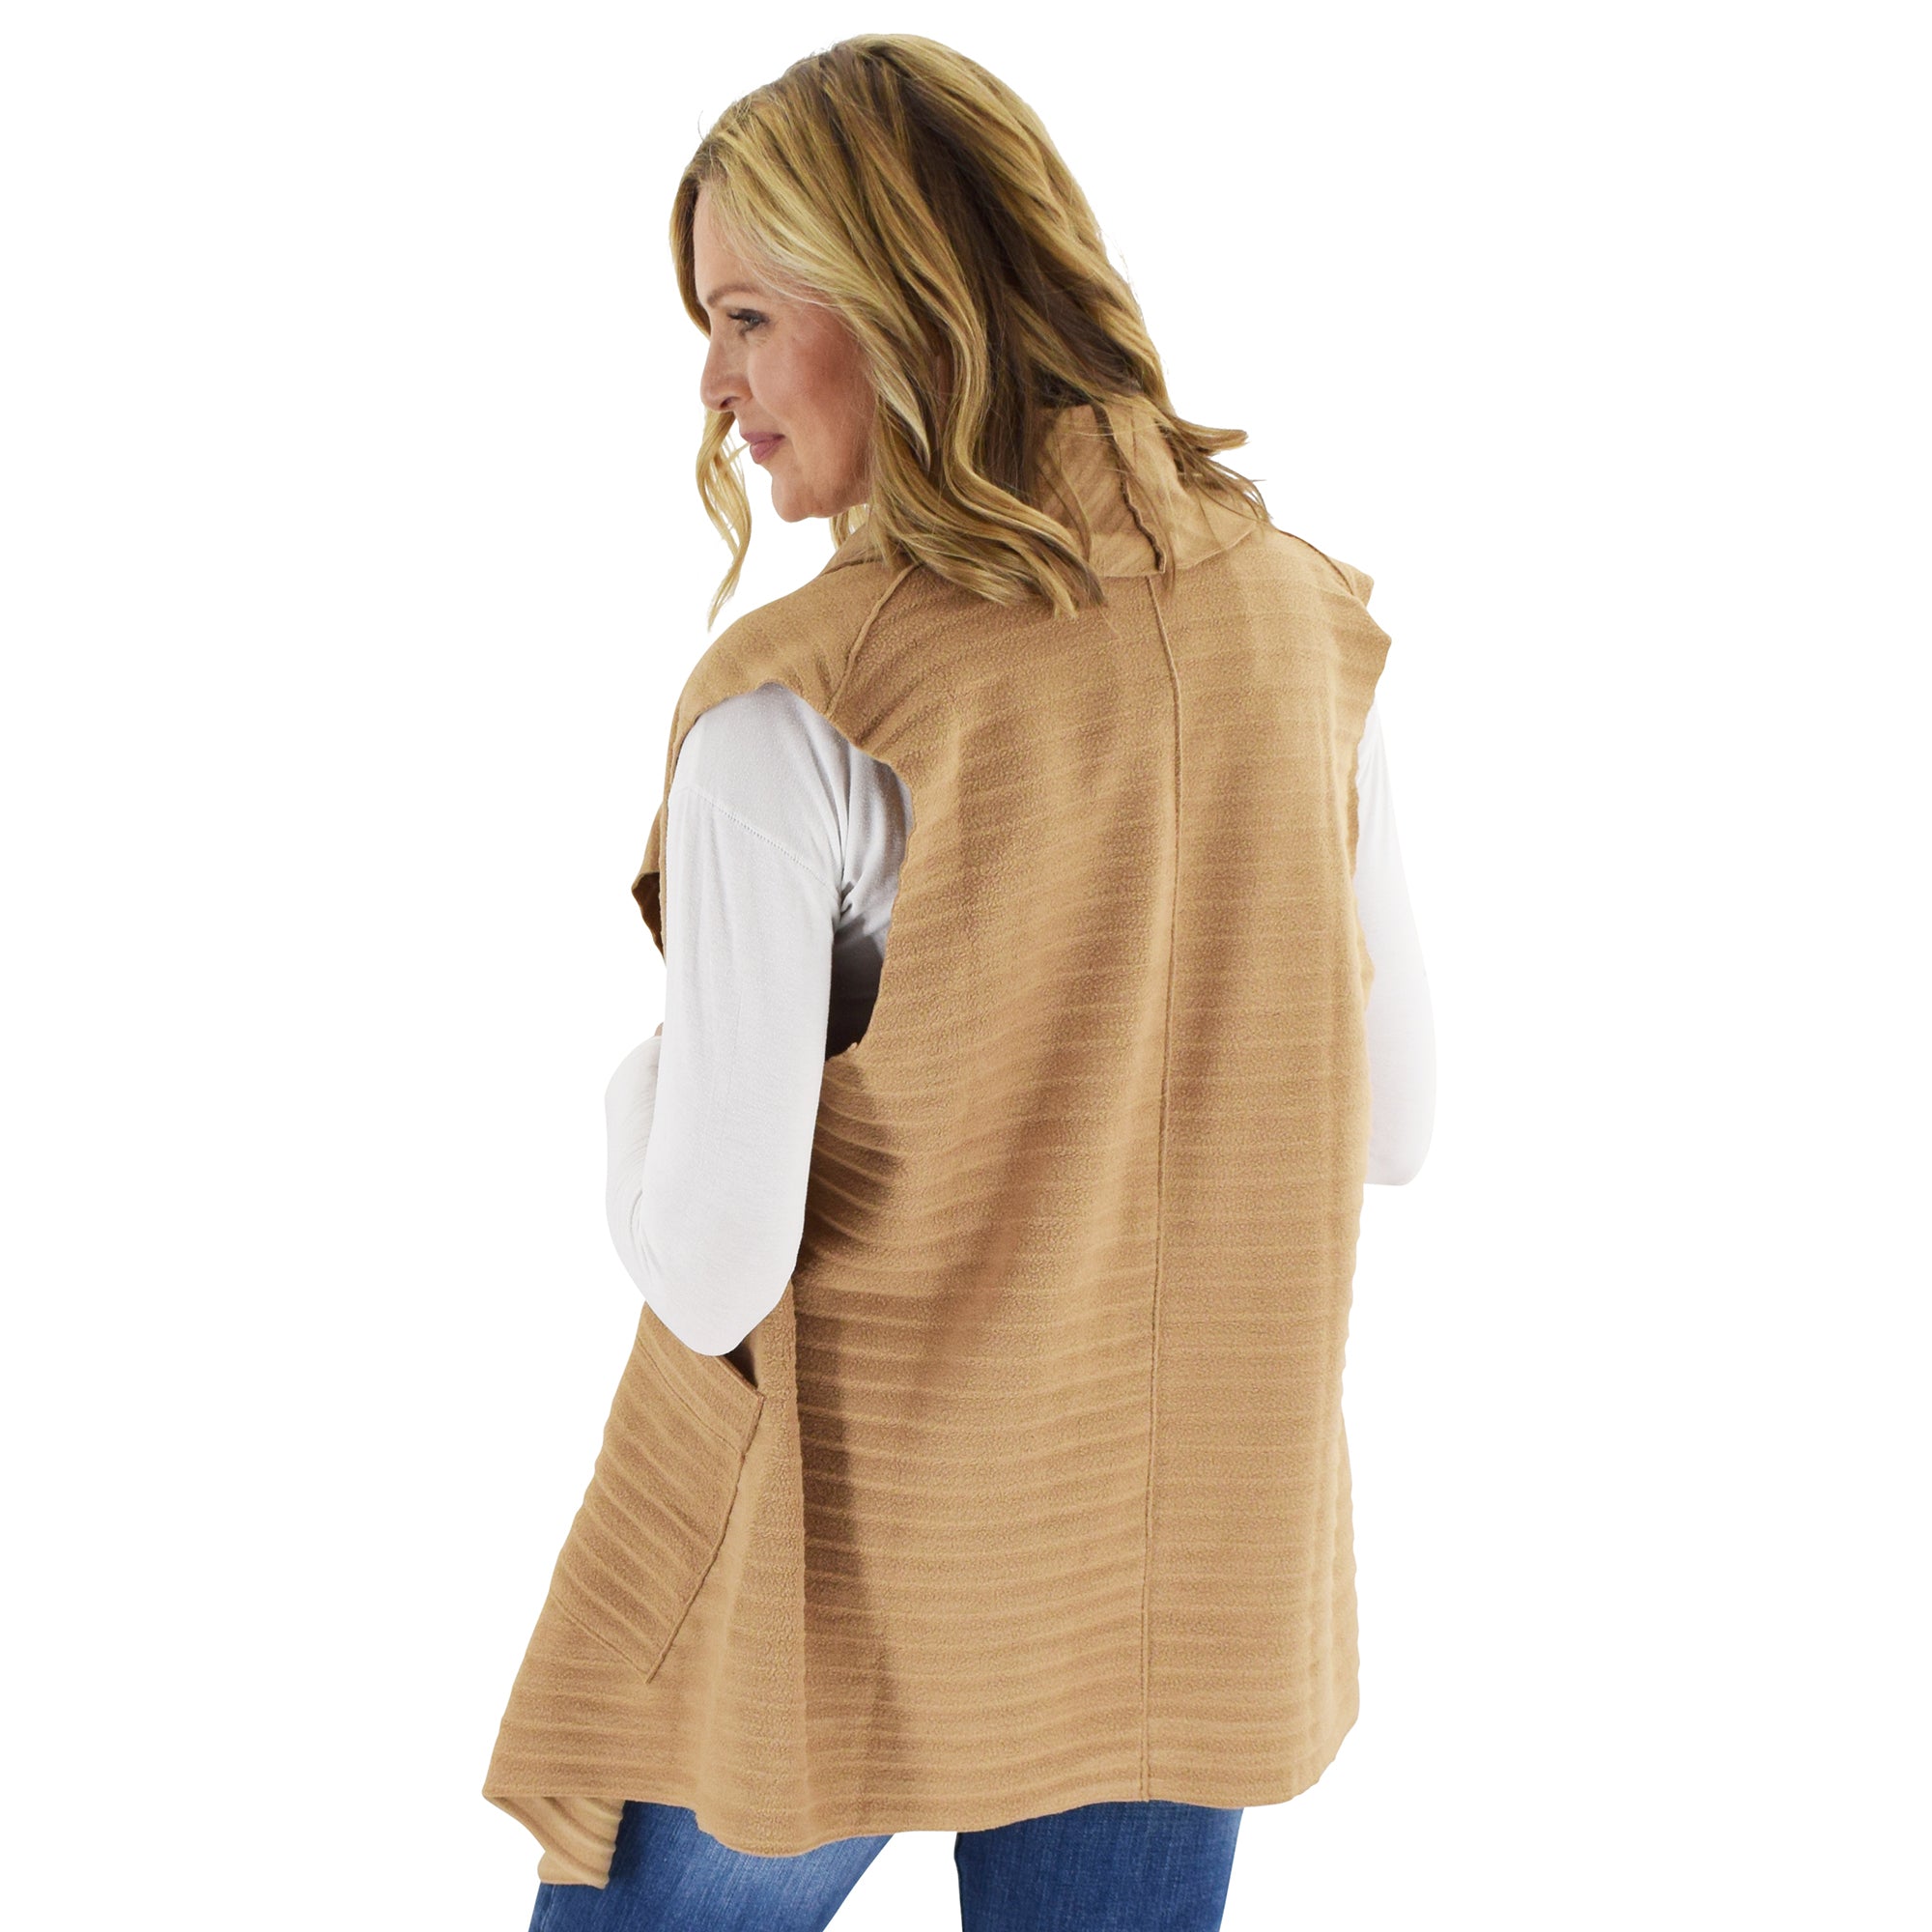 Le Moda Women's Sleeveless Pleated Open Front Fleece Vest Cardigan with Pockets at Linda Anderson. color_camel